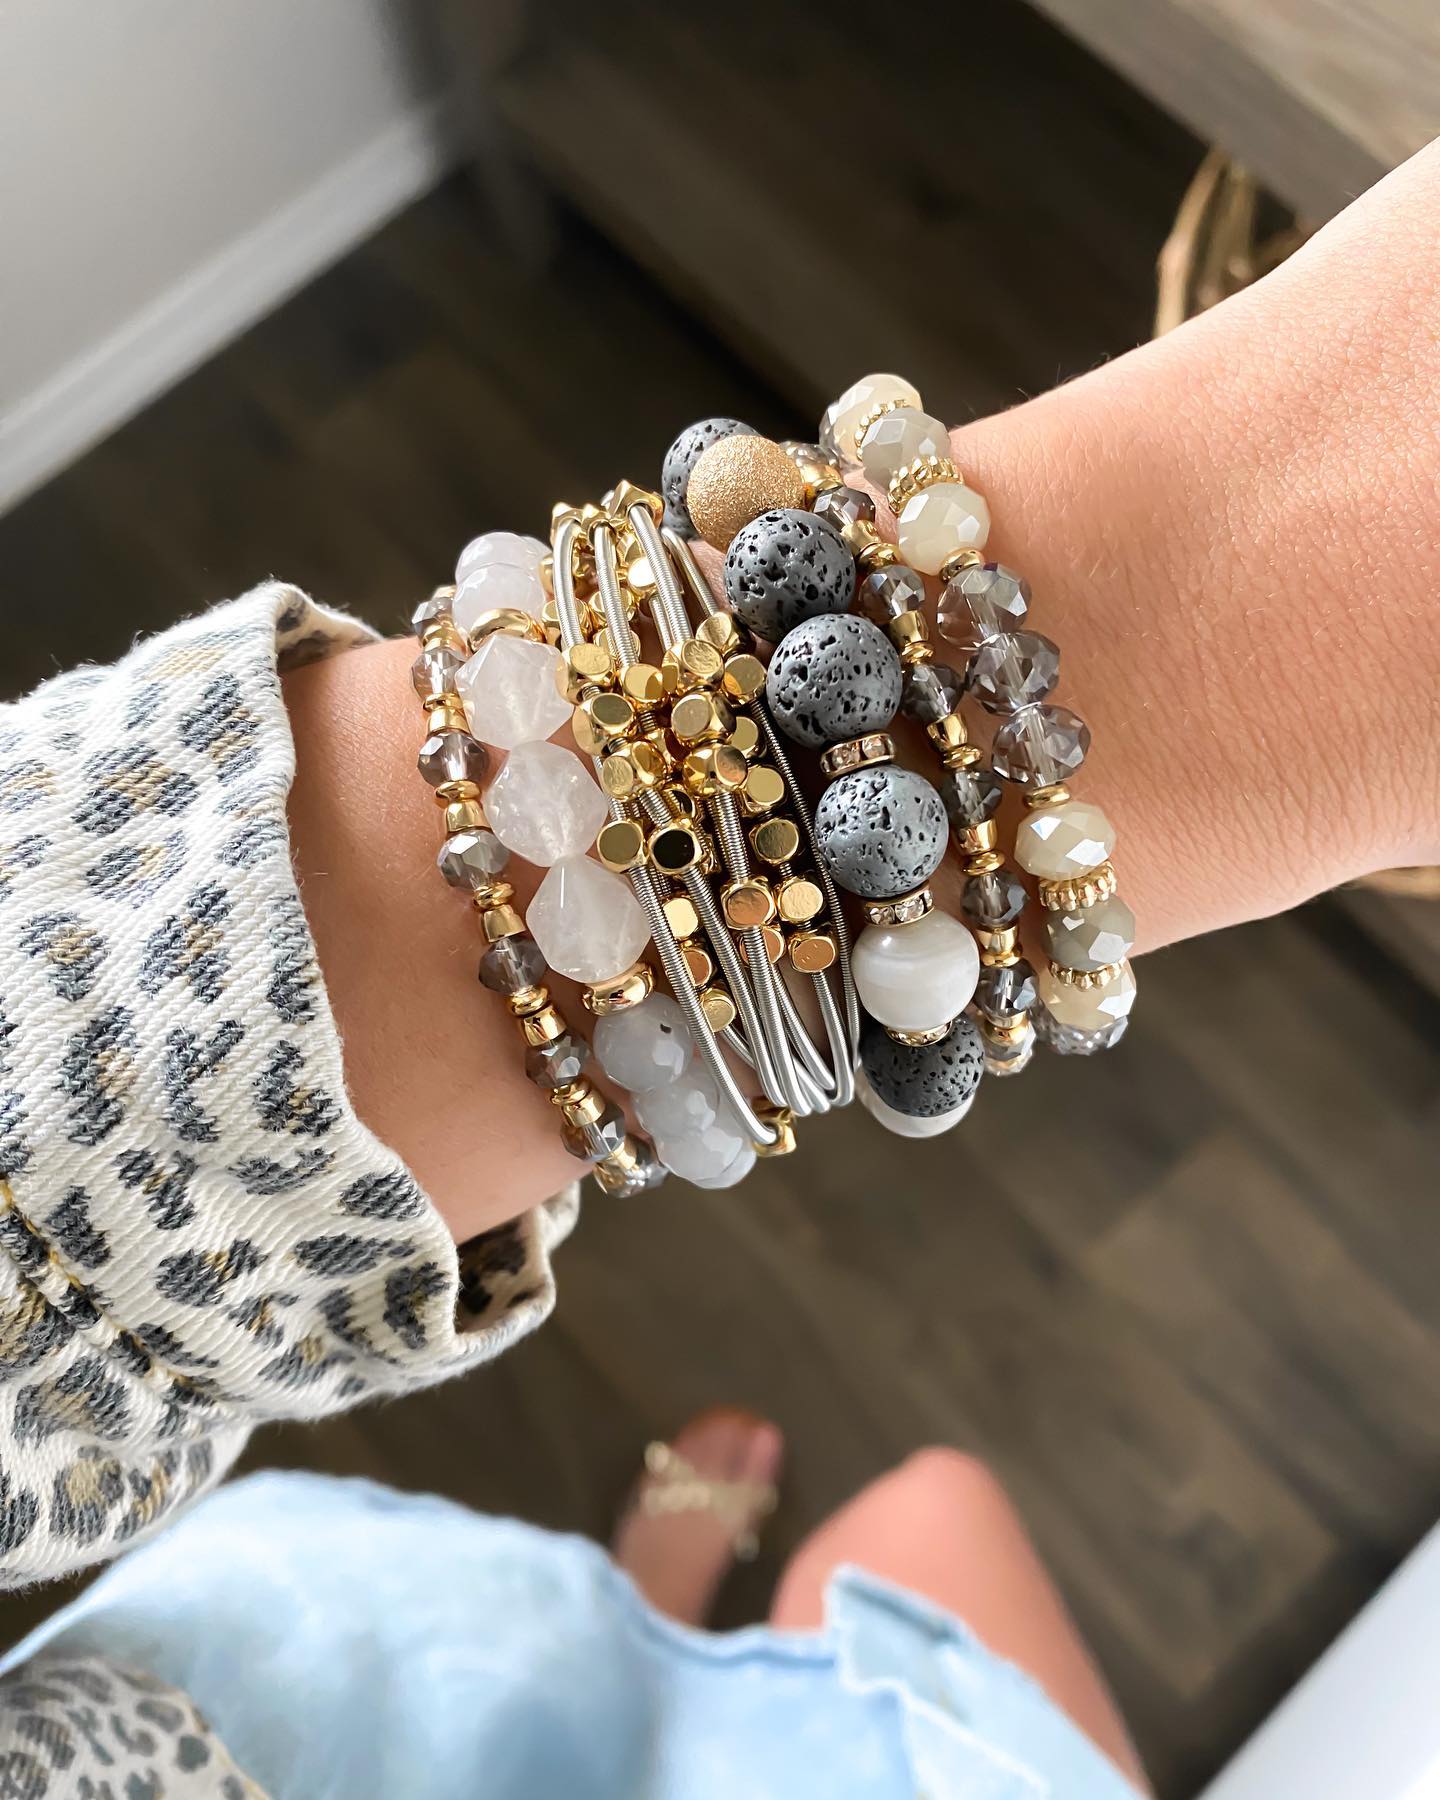 The Trend That Keeps Going Stacked Bracelets  Stay Stylish And UpToDate  With The Latest Fashion Trend  Sweetandspark